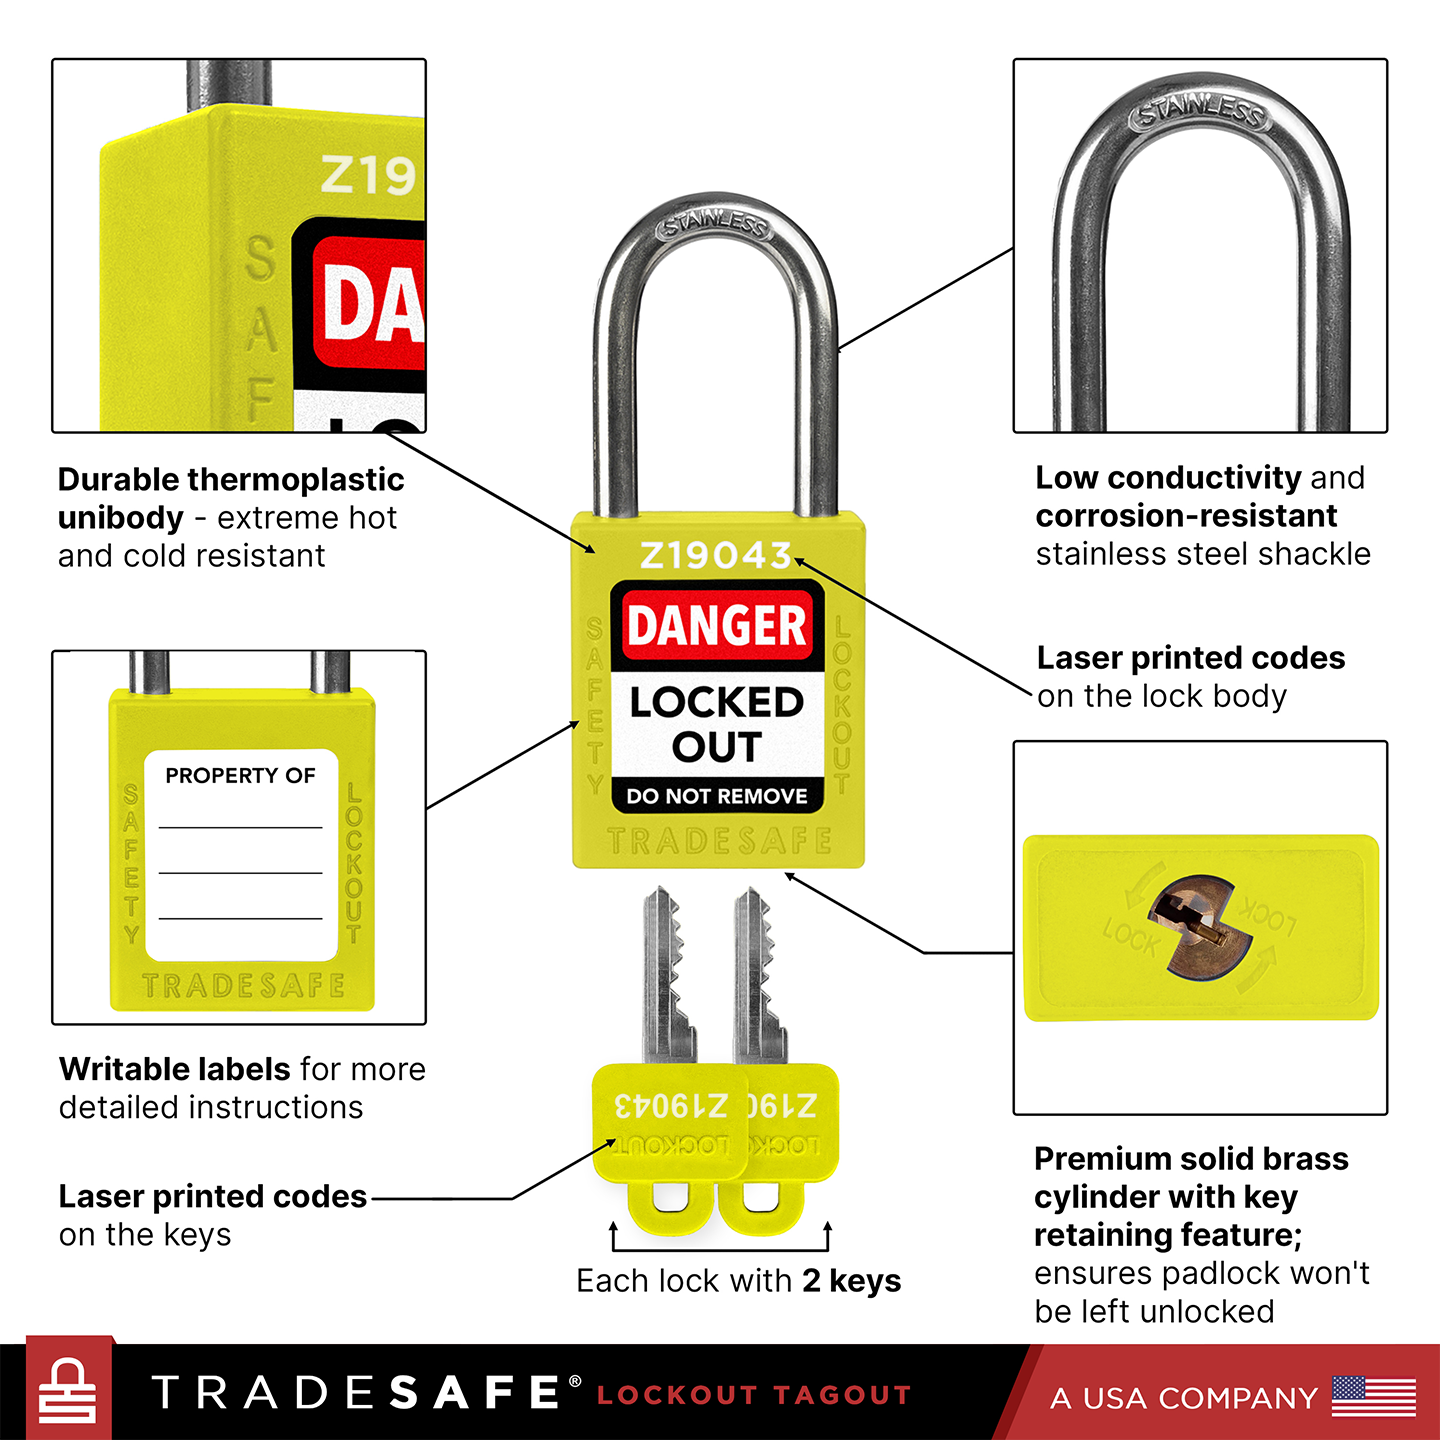 infographic of a yellow loto lock with 2 keys indicating materials used in each part